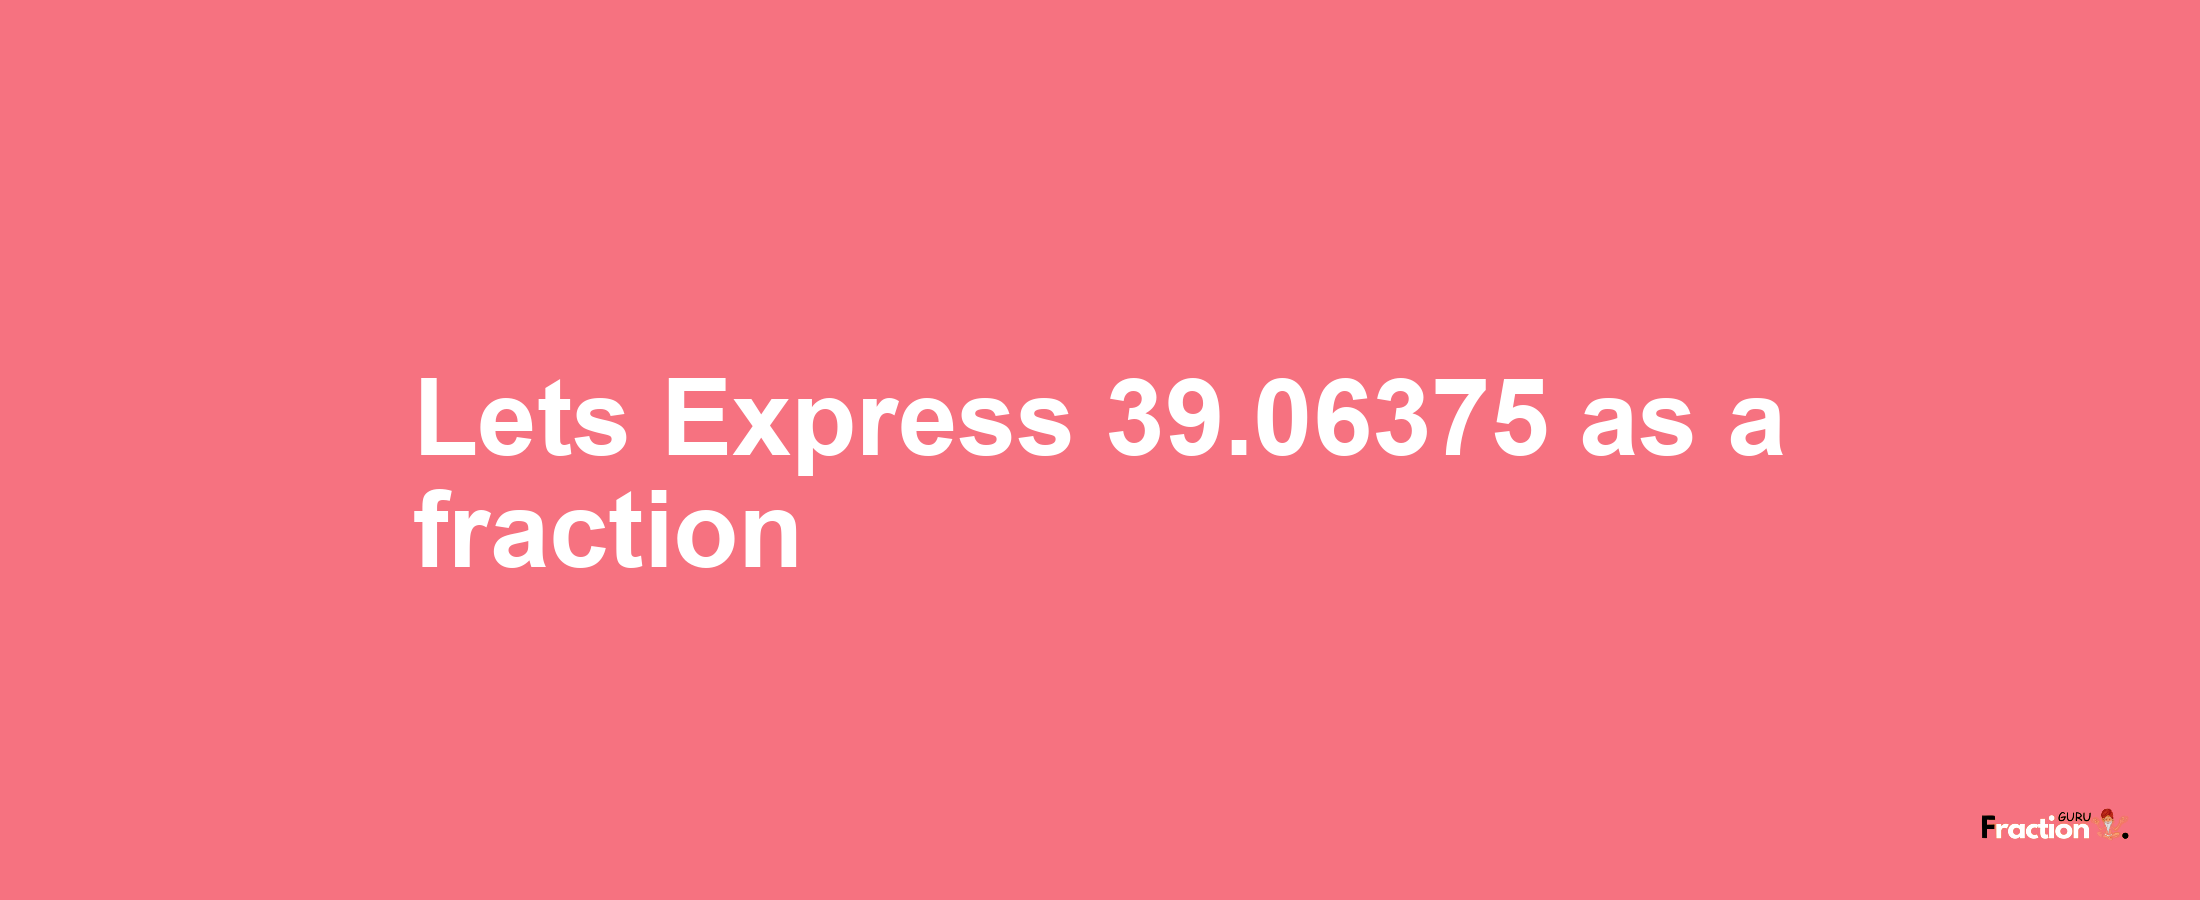 Lets Express 39.06375 as afraction